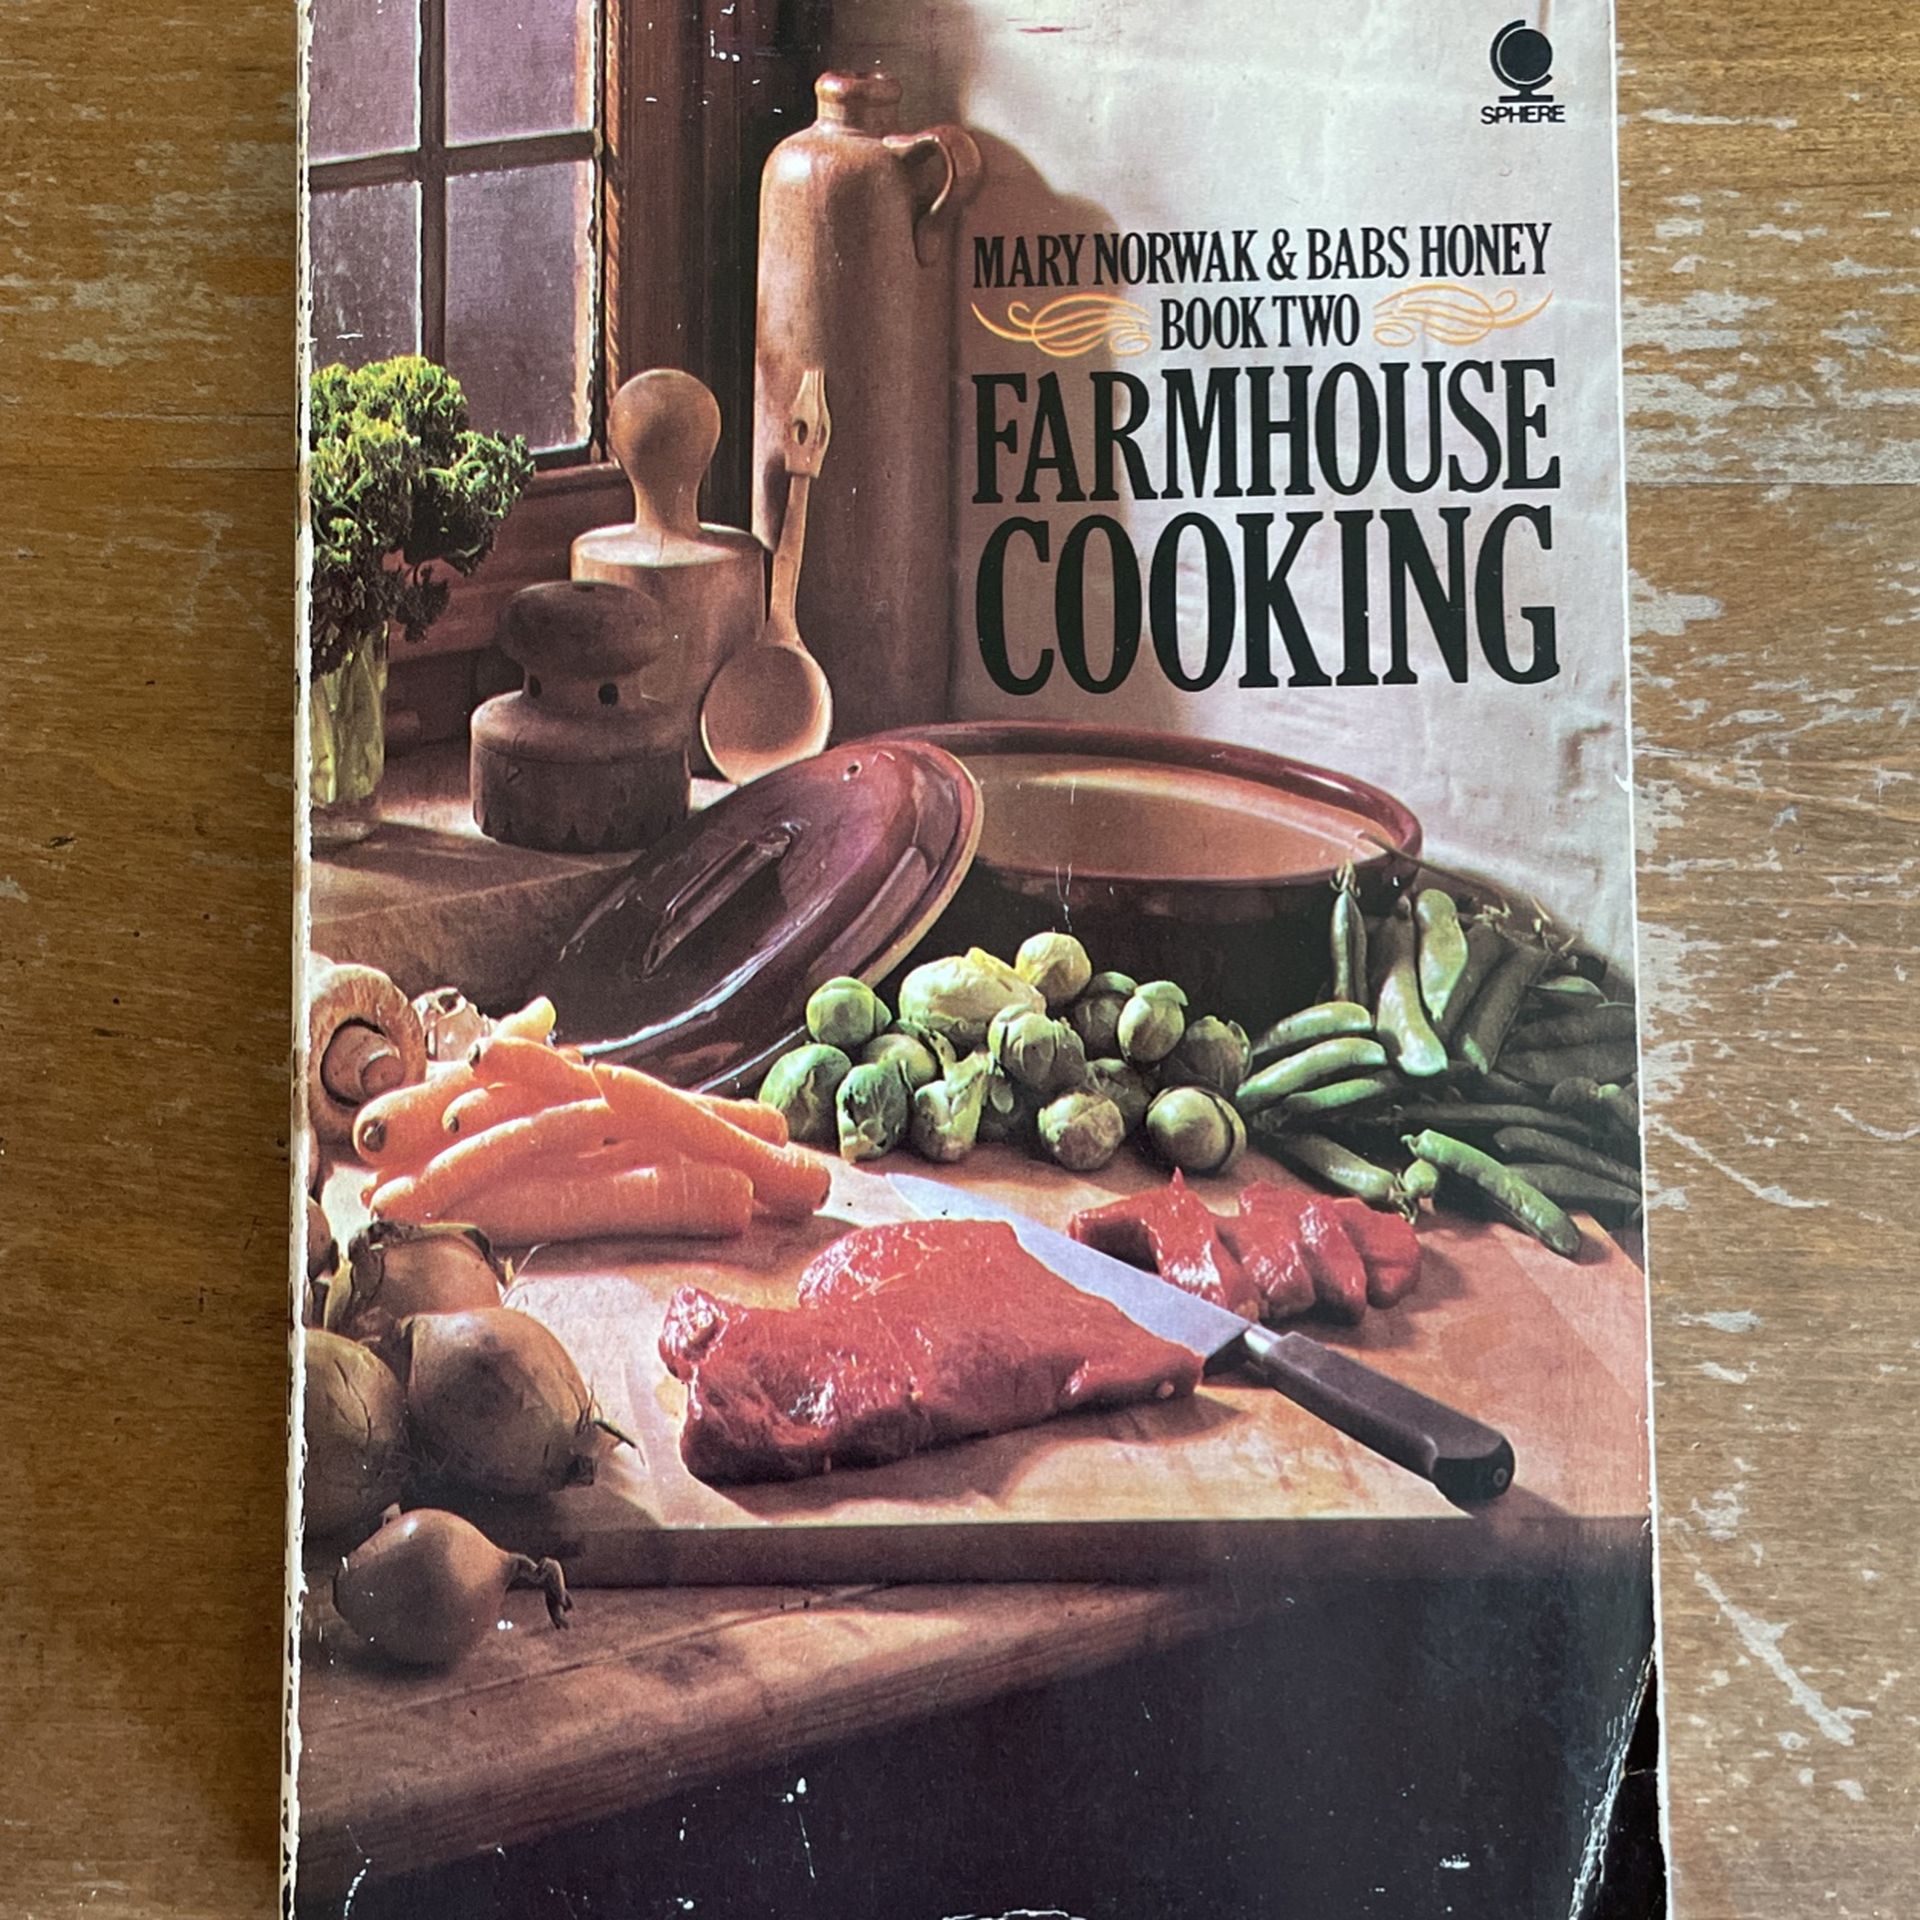 Vintage Farmhouse Cooking Book 2 By Mari Norwalk And Babs Honey MARKED DOWN 